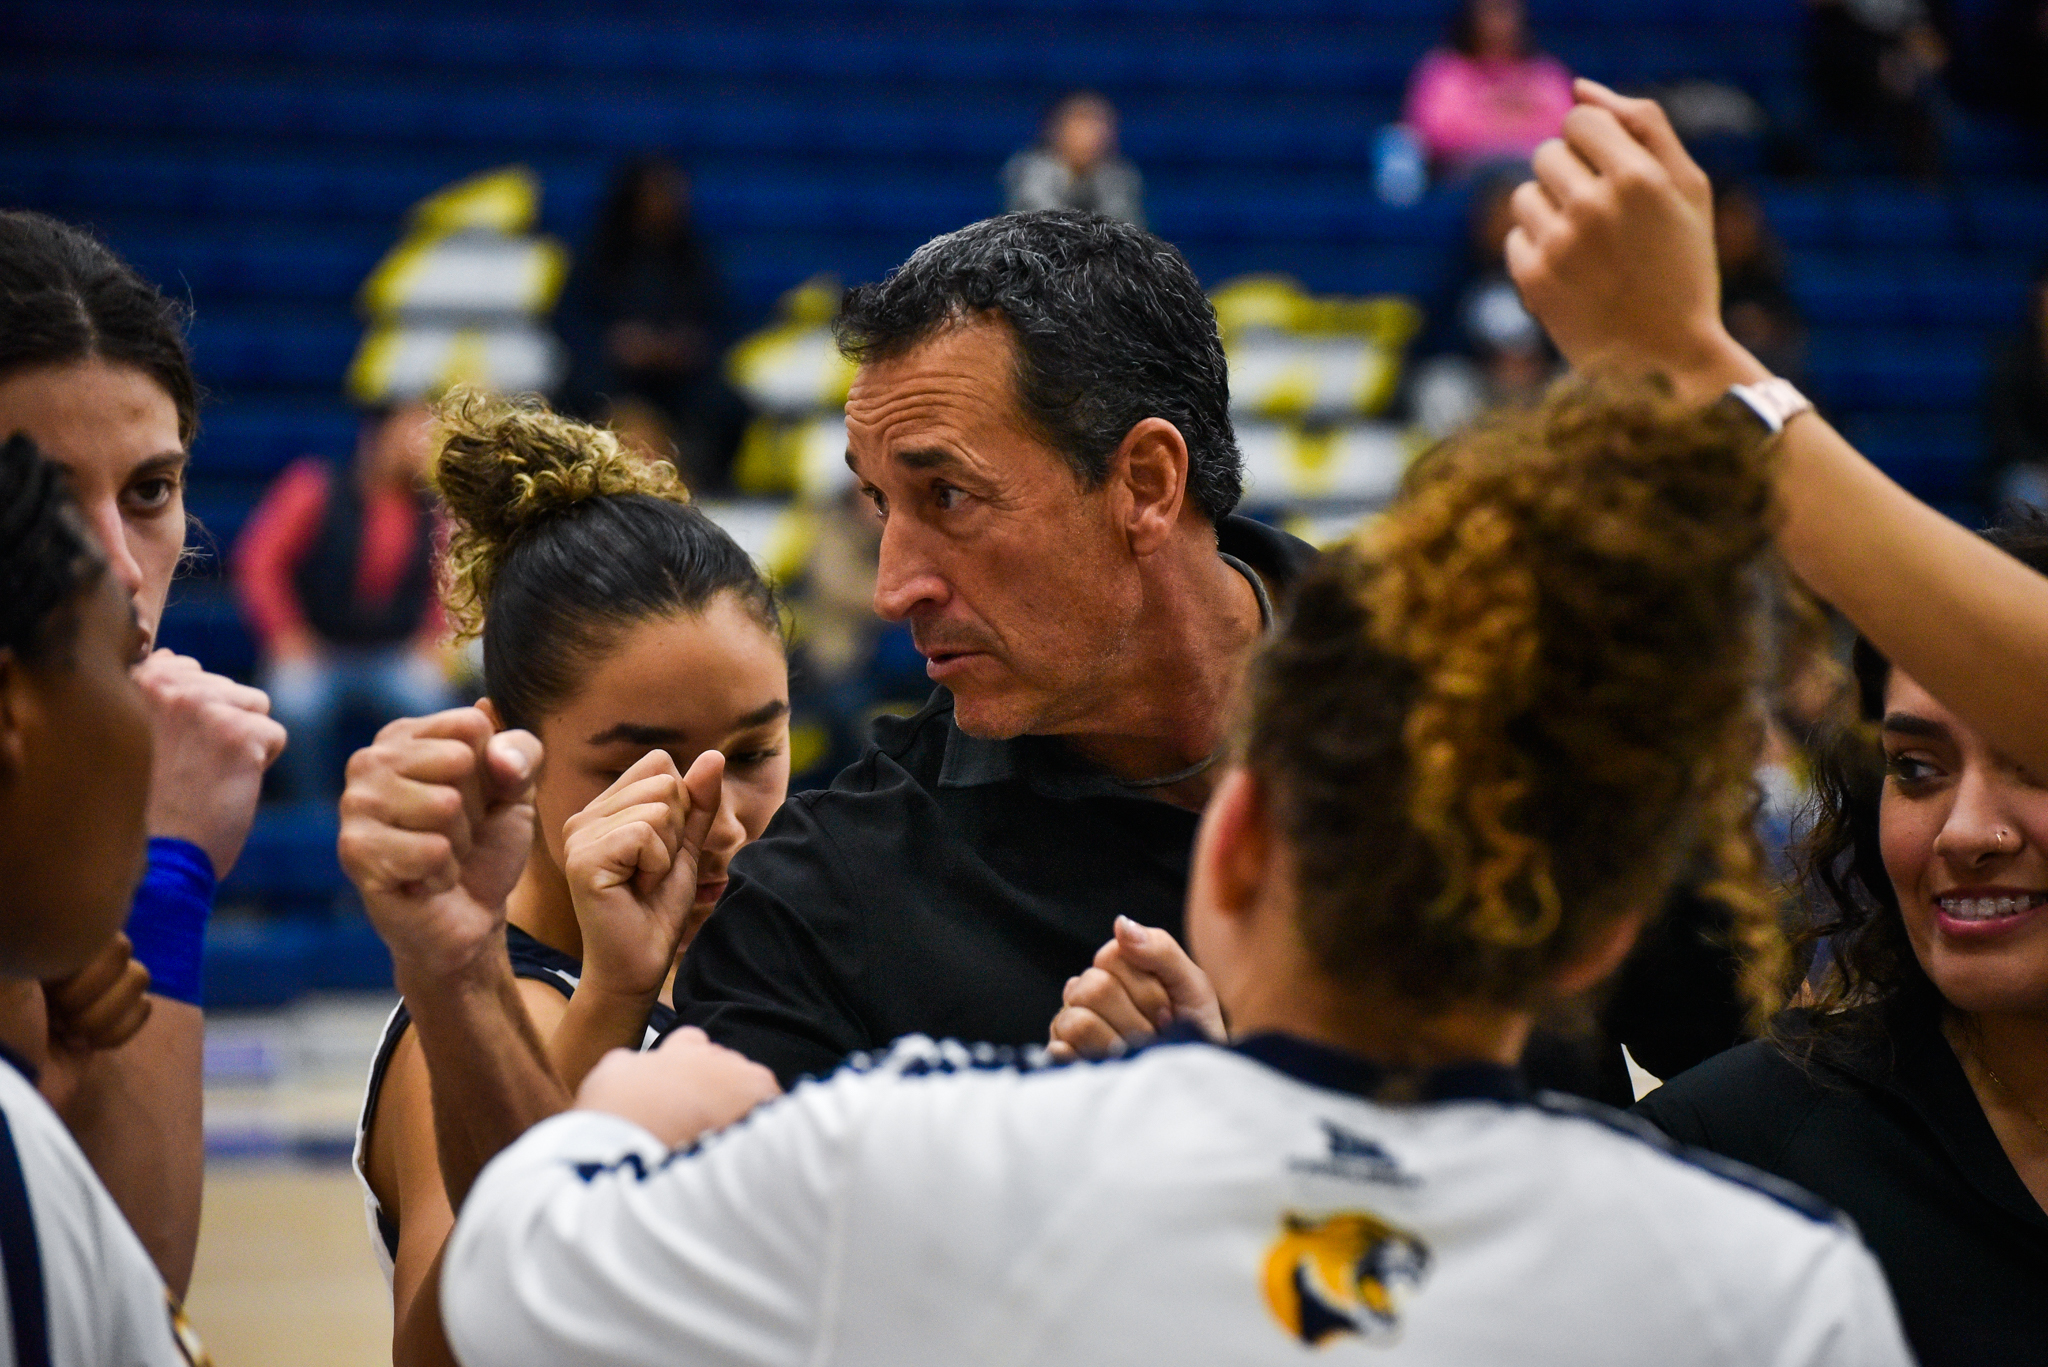 College of the Canyons women's basketball stock image.